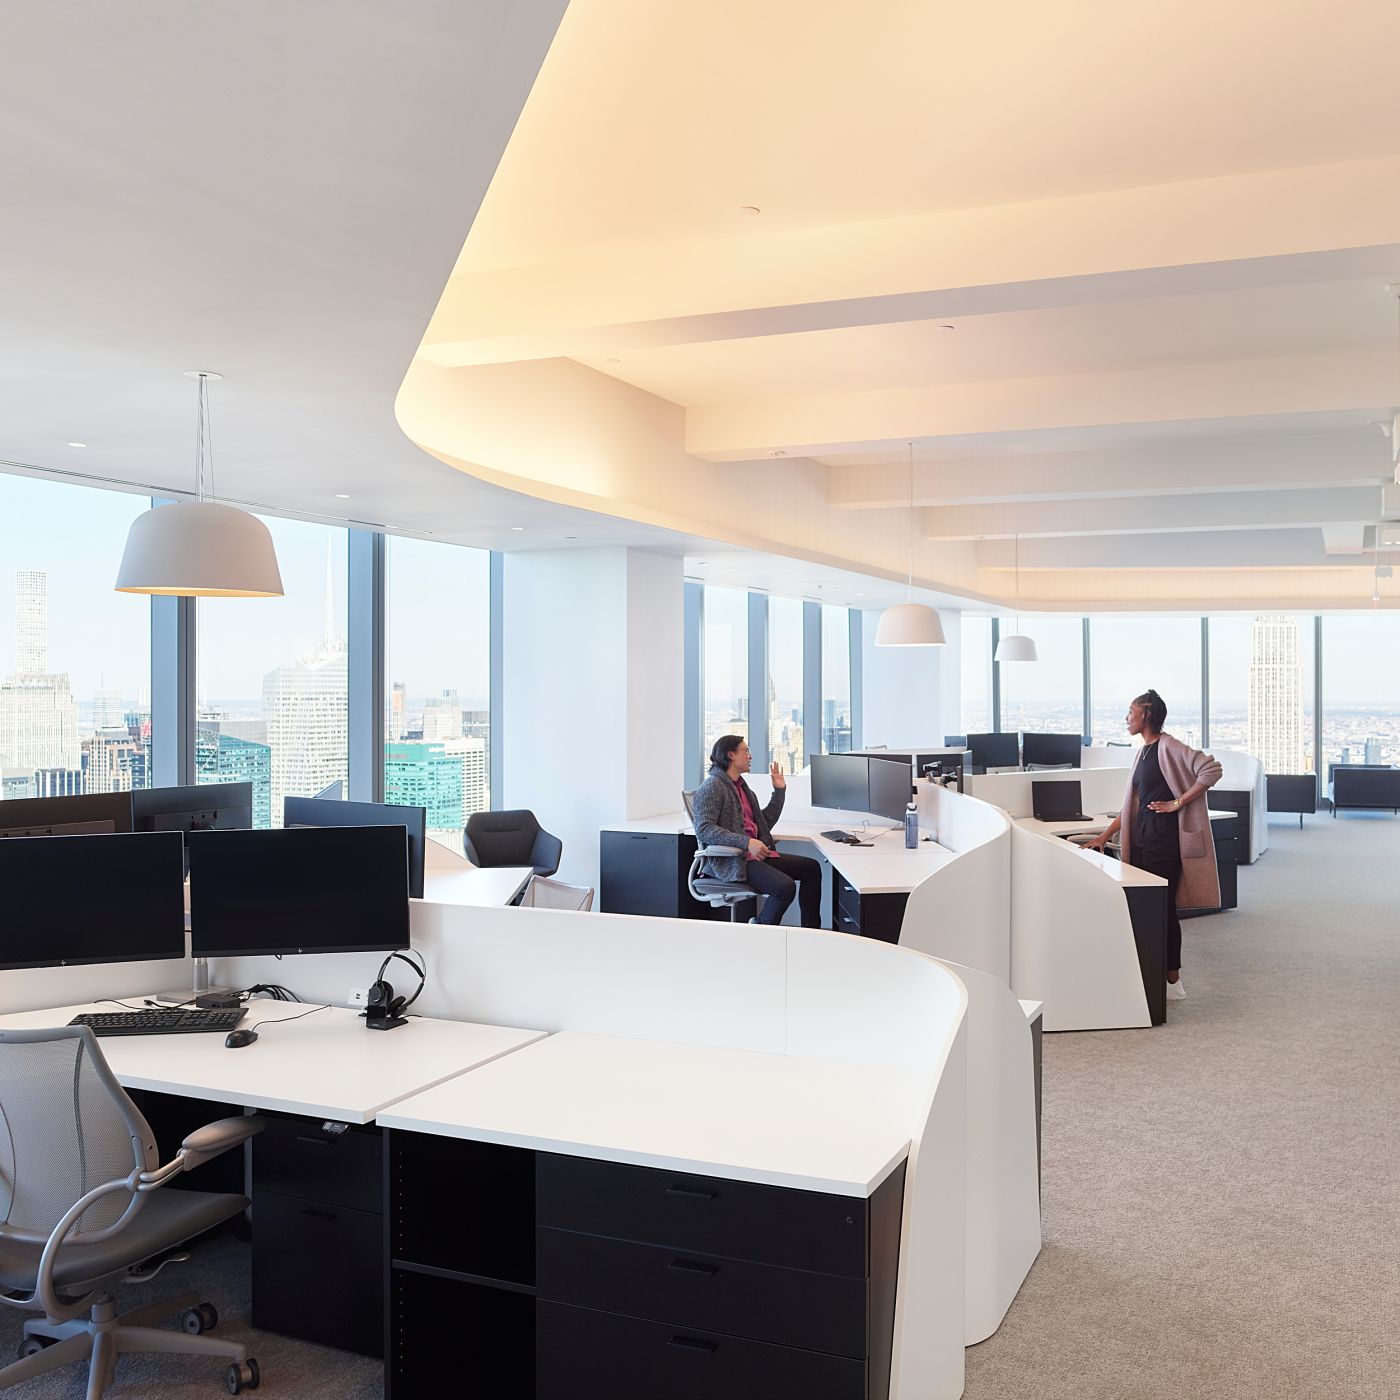 Custom open office stations maximize the spaces spectacular views and enhance the architectural details.